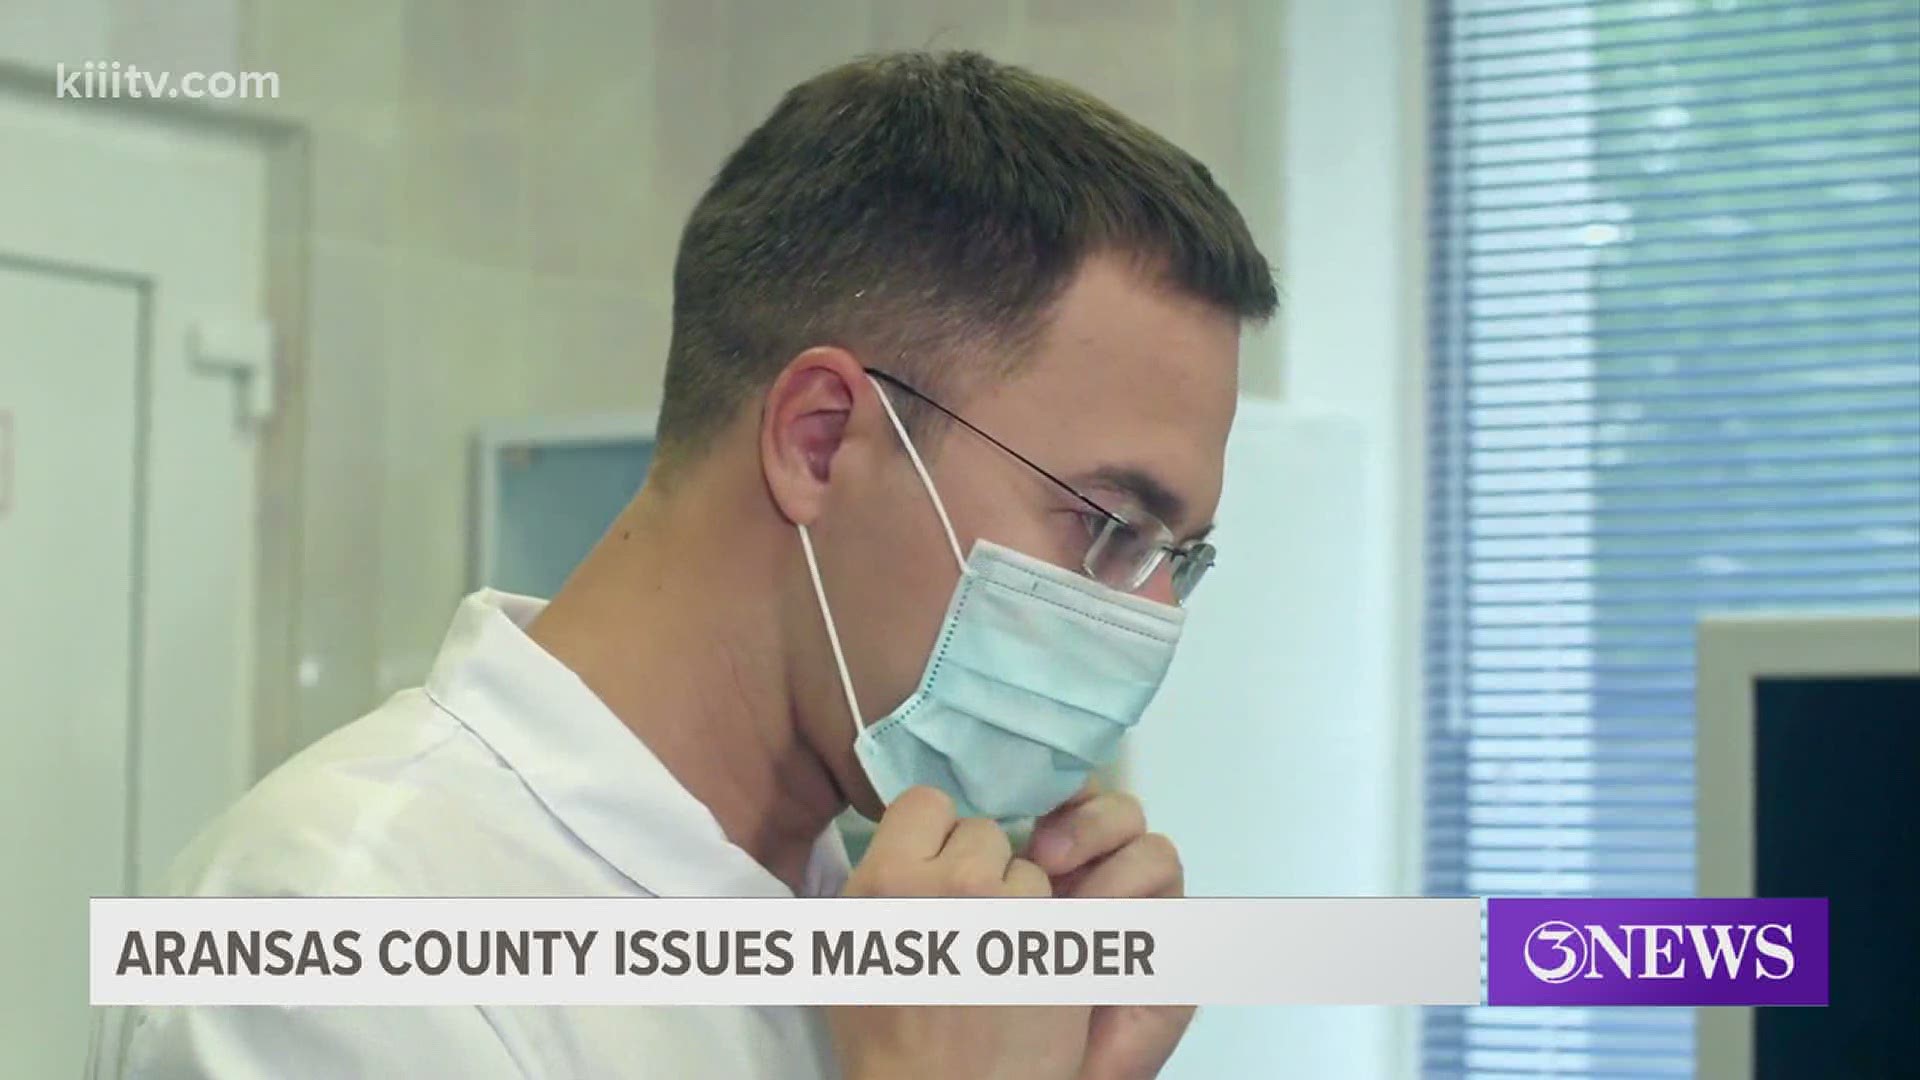 Aransas County has taken the step of issuing a Mask Order. It goes into effect at 11:59 p.m. June 30.